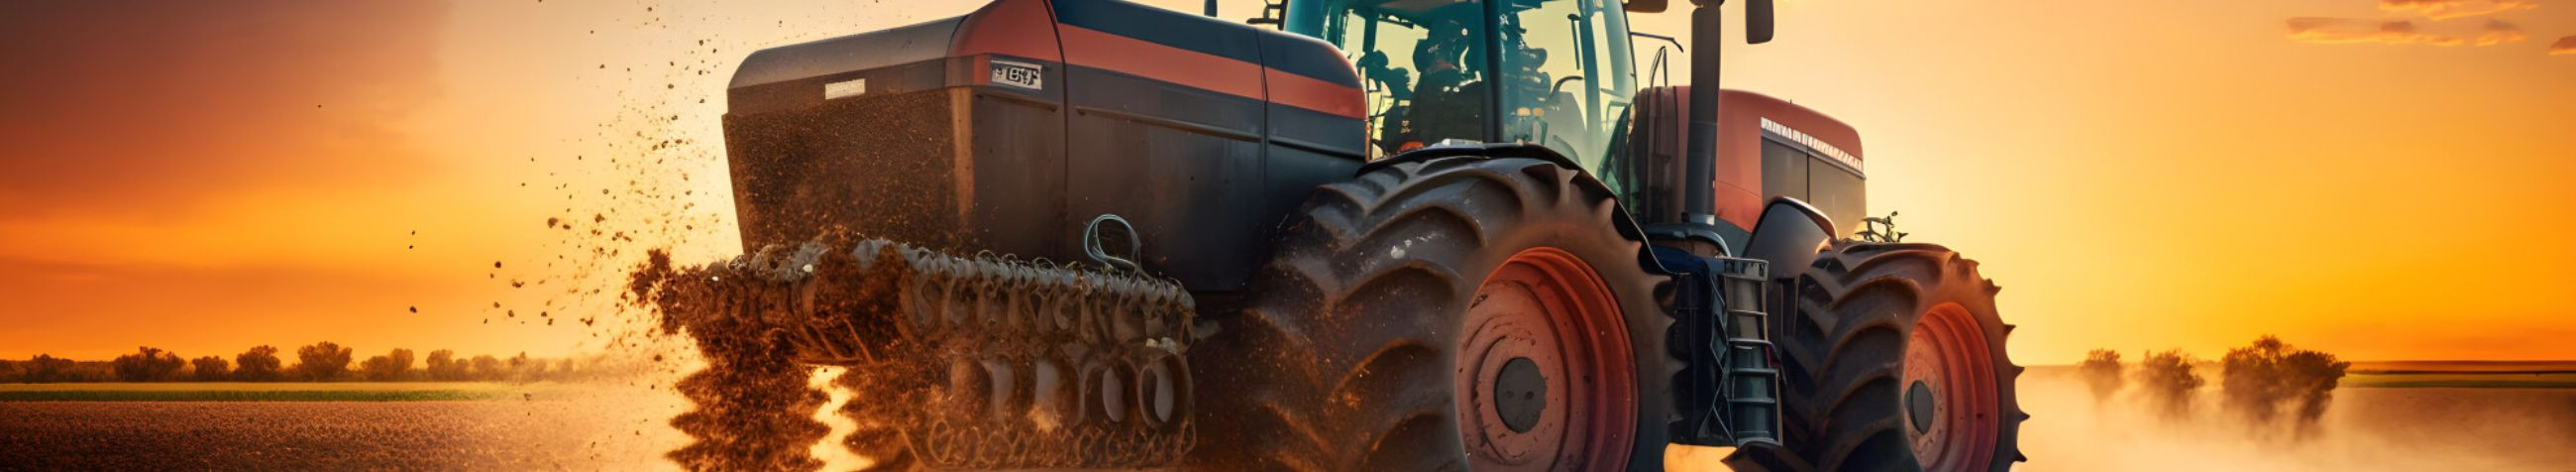 repair of tractors, maintenance of tractors, agriculture machine repair, agricultural machinery maintenance, repair of other heavy equipment, maintenance of other heavy machinery, spare parts management, tractor maintenance, maintenance of the mulching assembly, soil tillage aggregate services